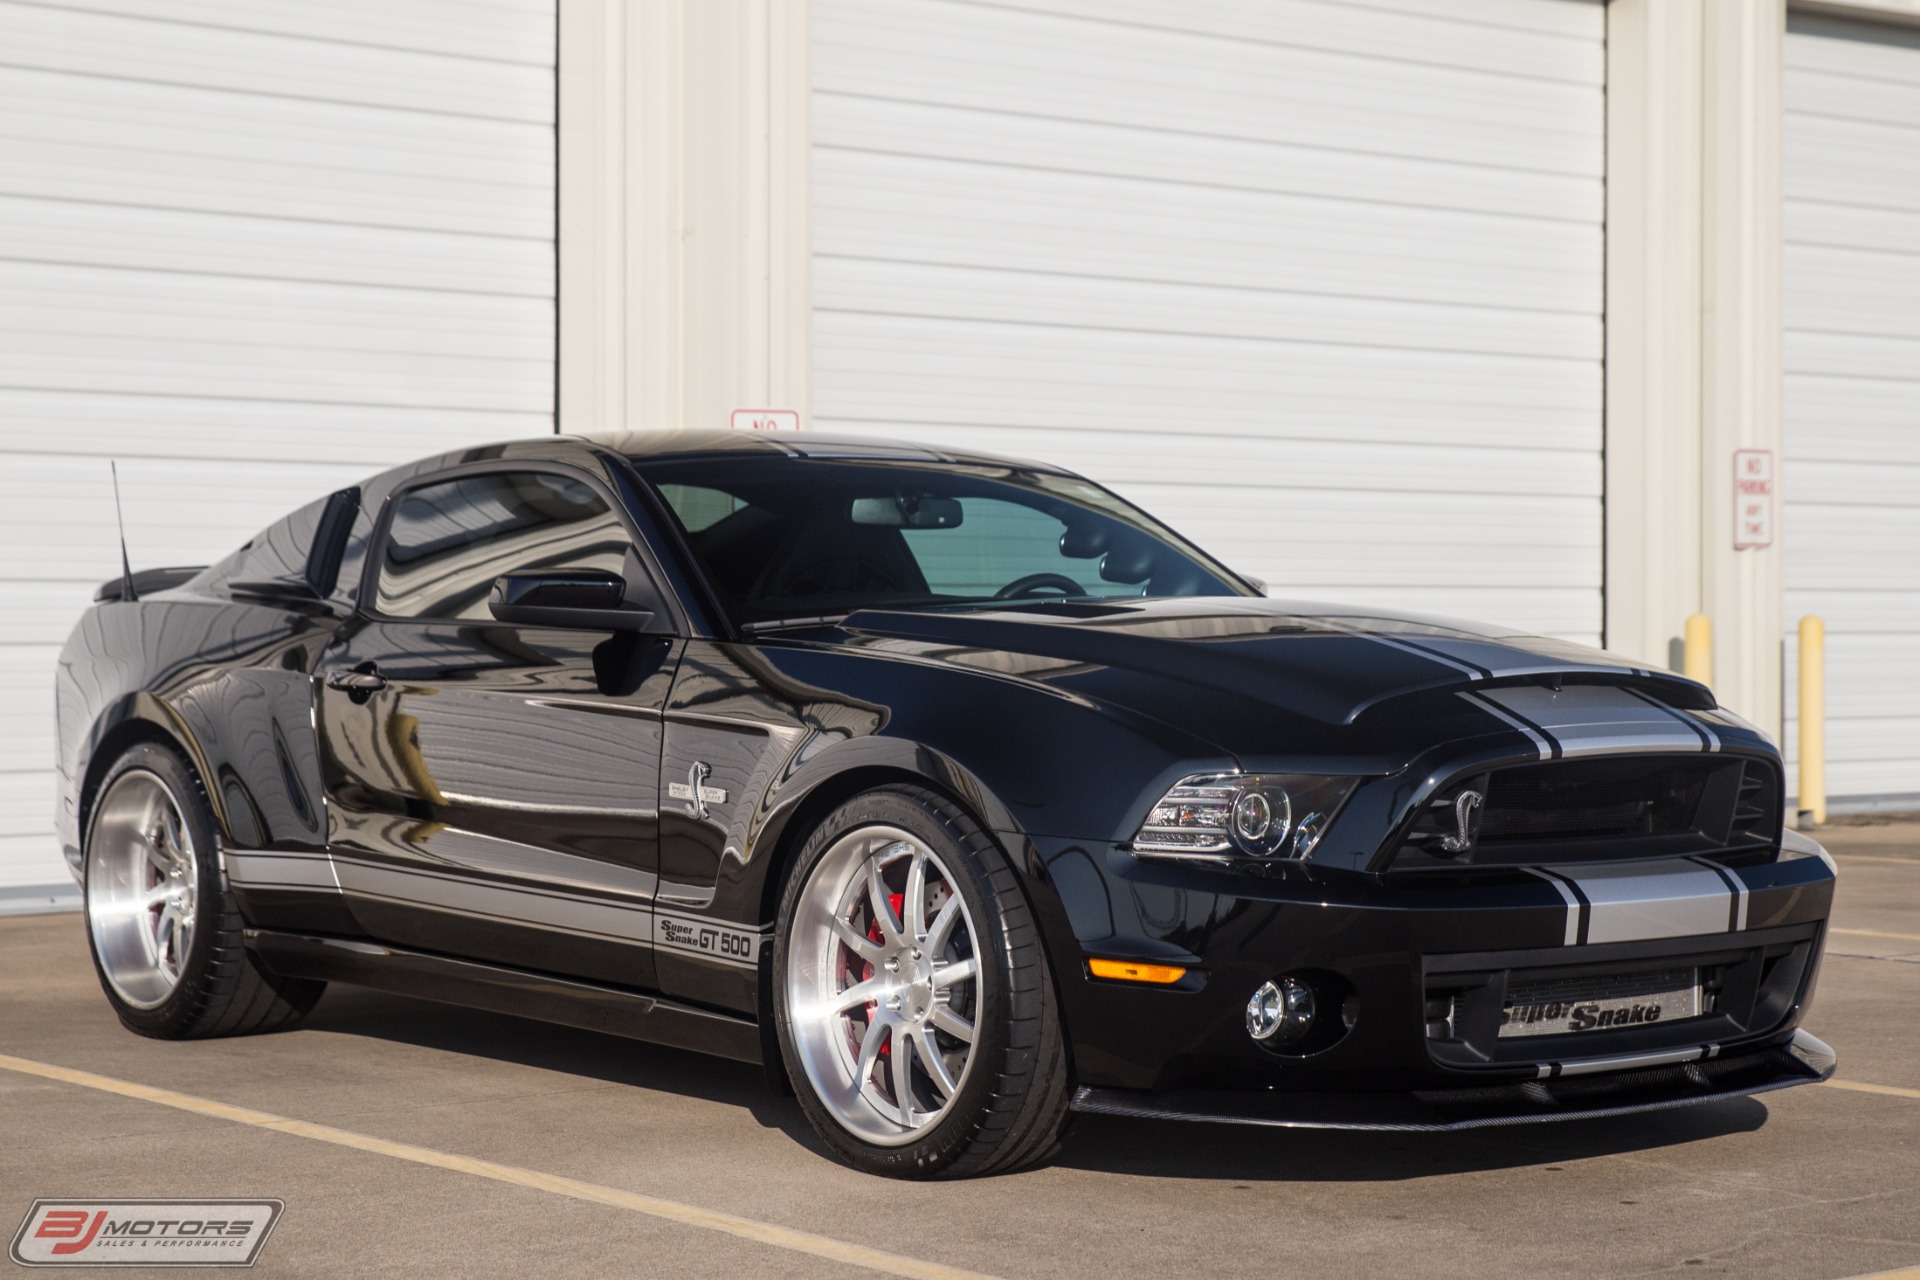 Used 2014 Ford Mustang Shelby Super Snake For Sale 129 995